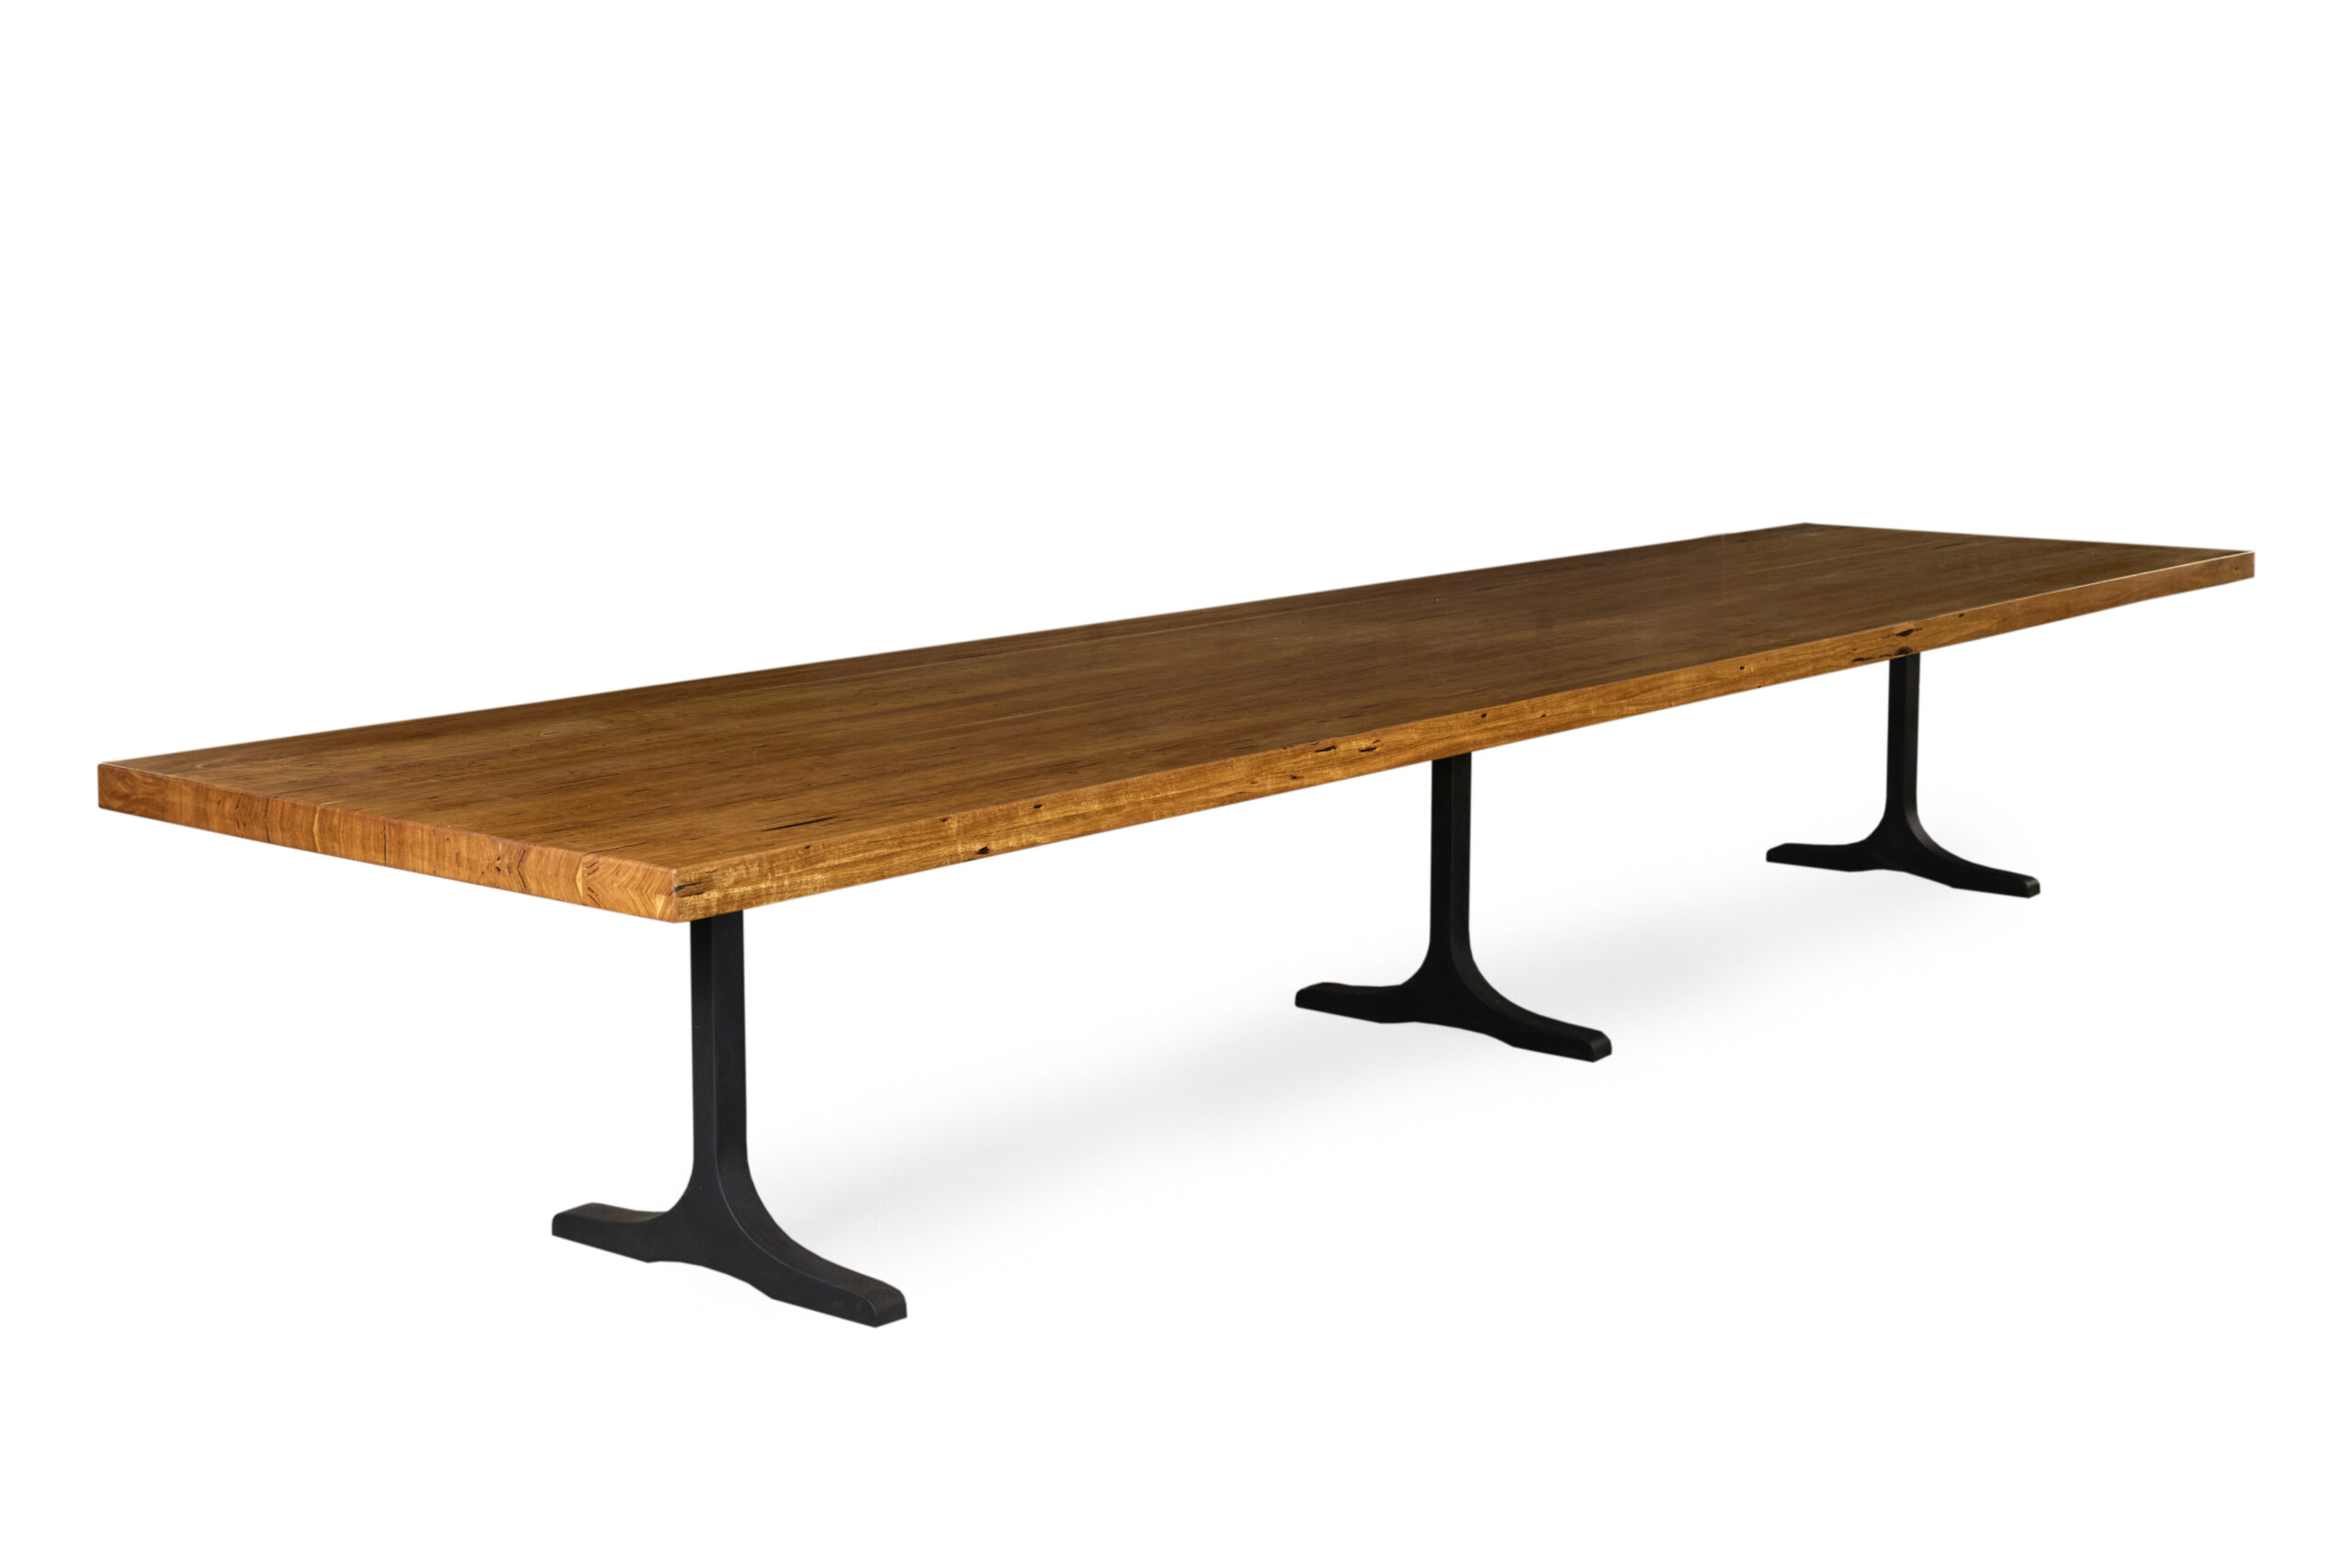 Arranmore Furniture presents Rose Bay Dining Table Custom Edge - Victorian Ash timber with I Beam Black Steel base. Ideal for gatherings. Handcrafted excellence.